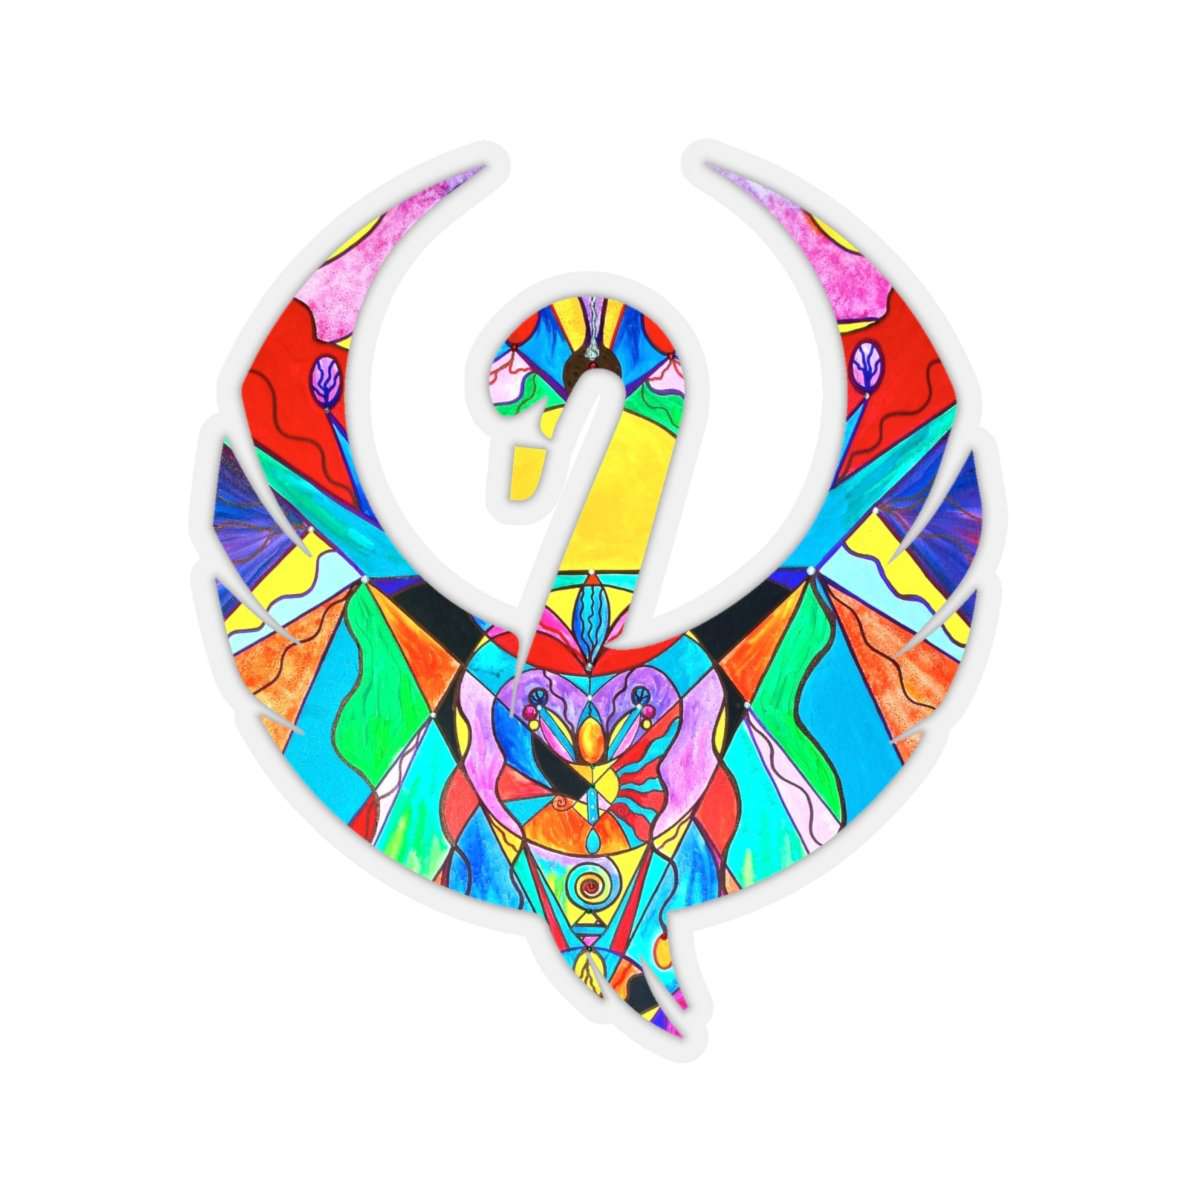 we-are-the-best-place-to-shop-arcturian-metamorphosis-grid-swan-stickers-sale_12.jpg